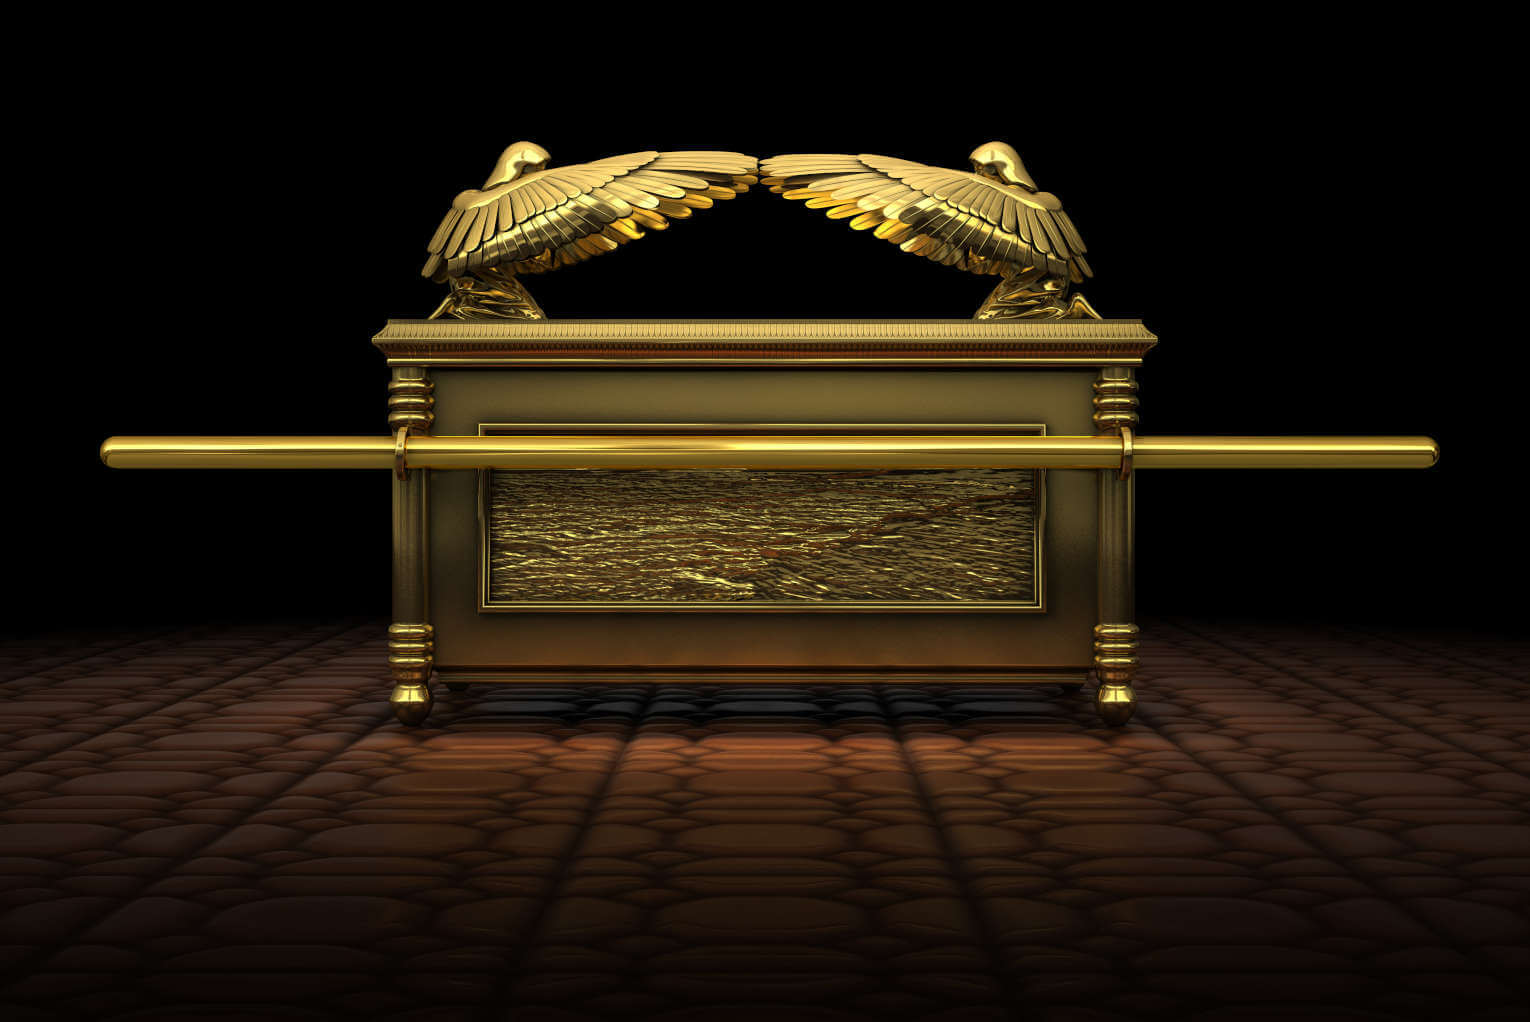 WATCH: Is the Ark of the Covenant really located in Ethiopia?